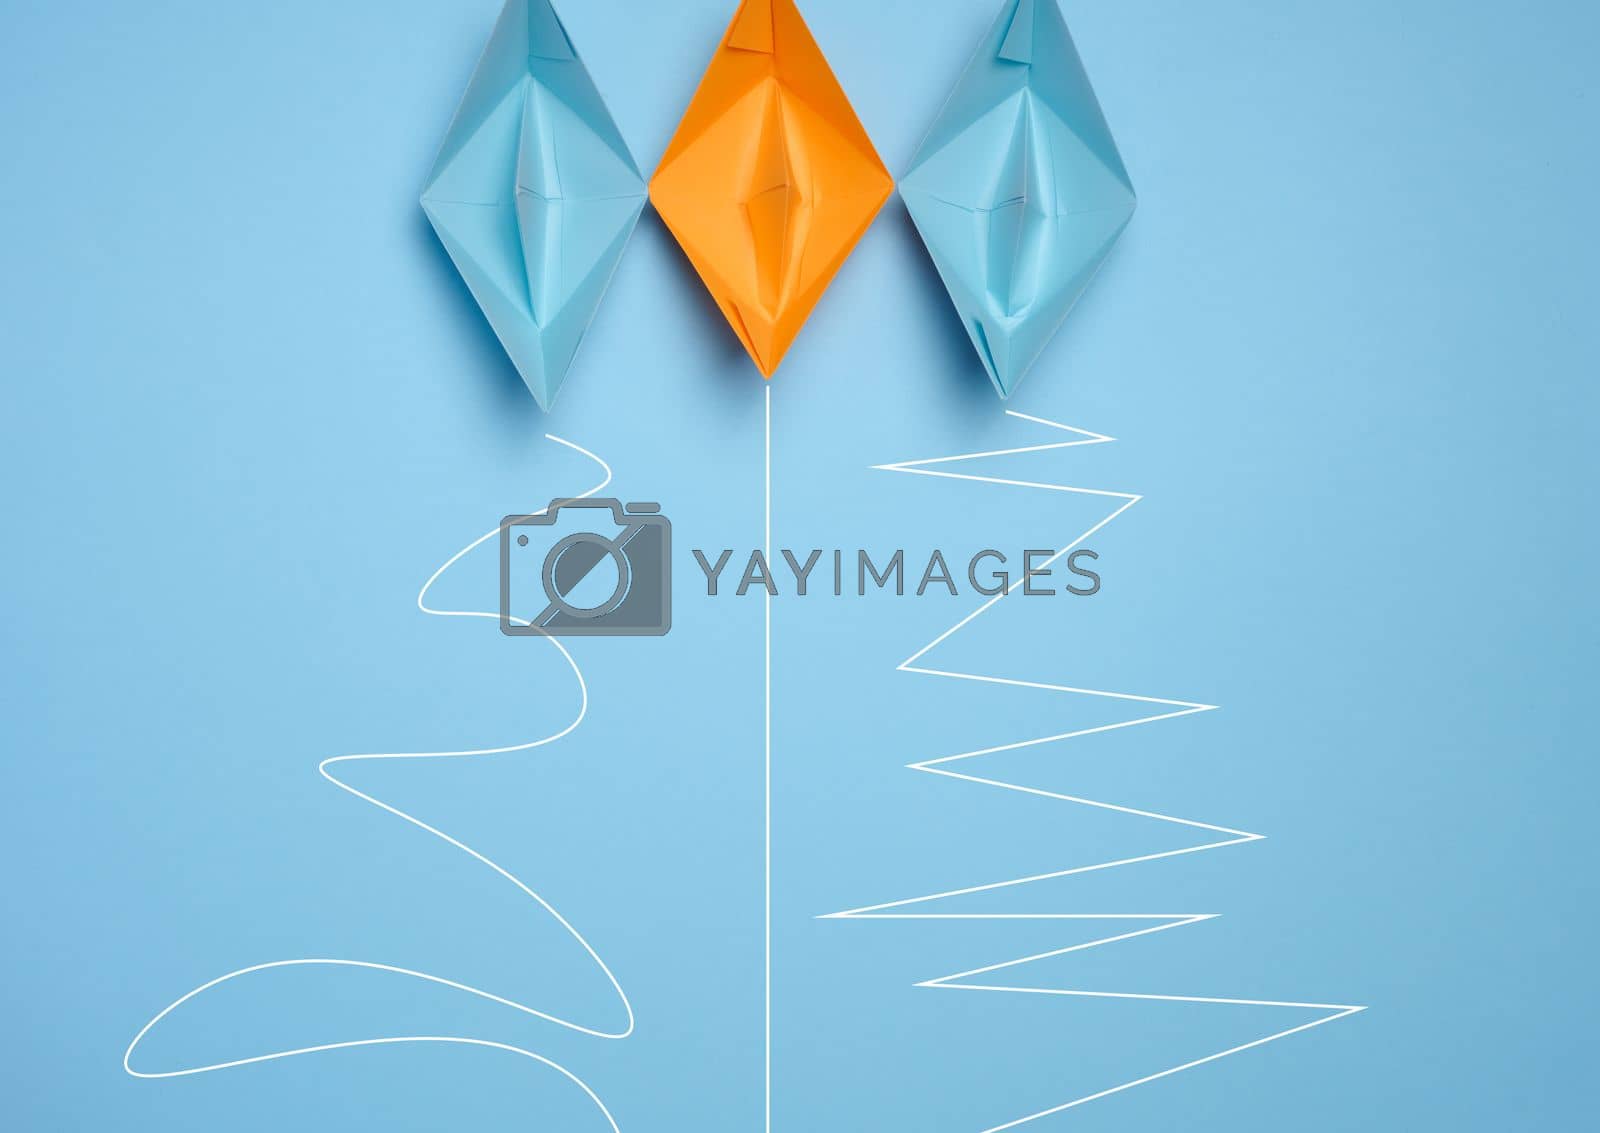 Royalty free image of Three paper boats with different trajectories on a blue background, concept of goal achievement differences, effectiveness by ndanko